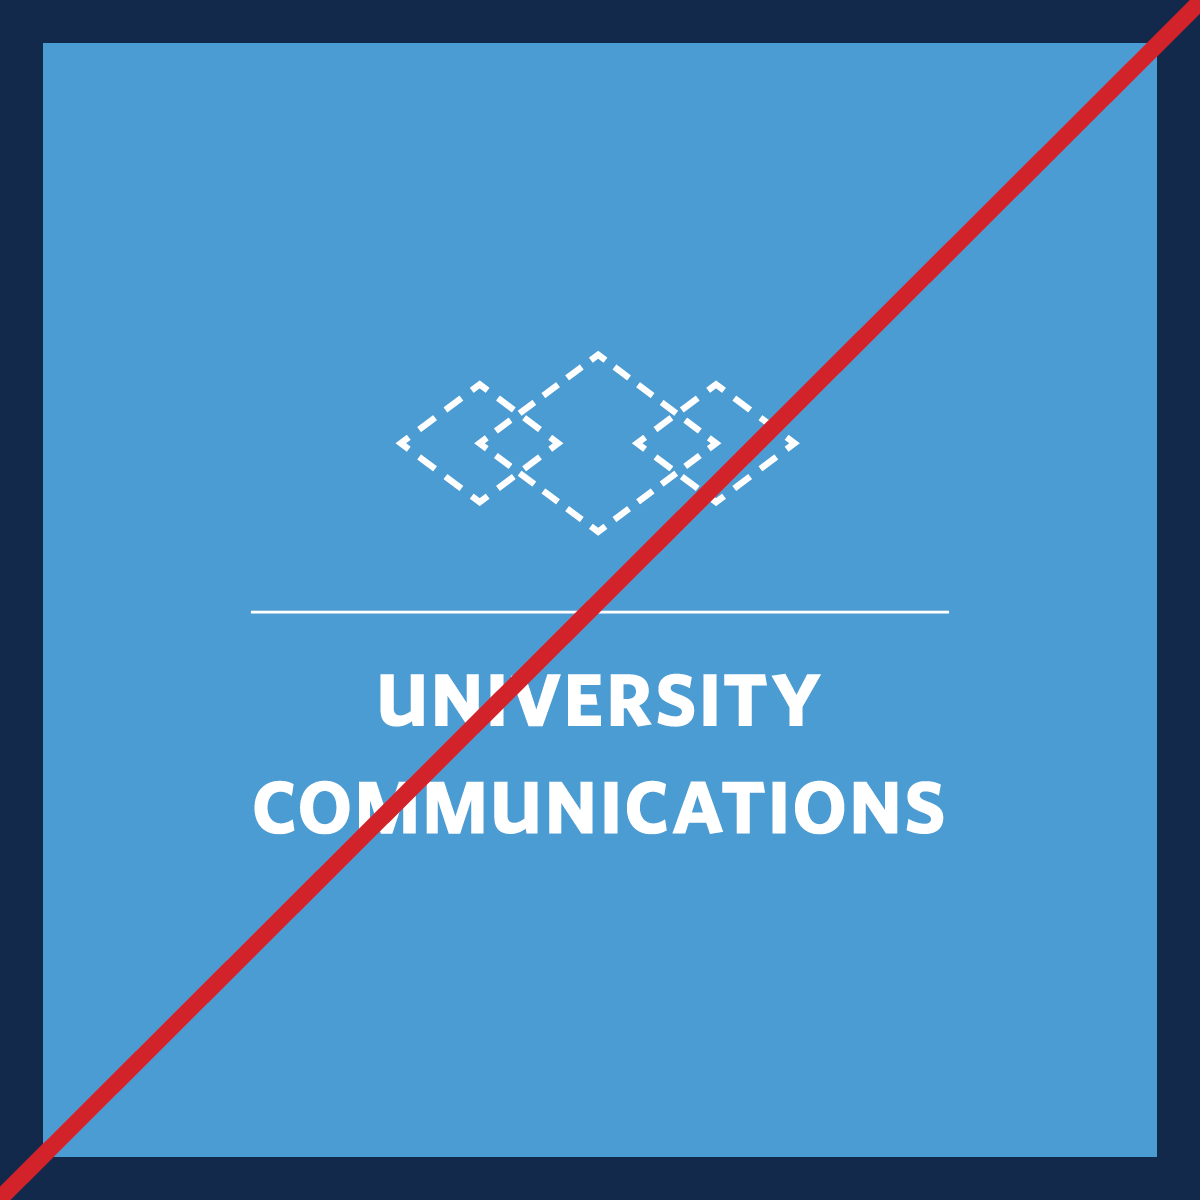 Carolina Blue square with navy blue outline that has uses a modified overlapping diamond shape on top of "University Communications" text, forming an improper logo. The design has a red line going through it.